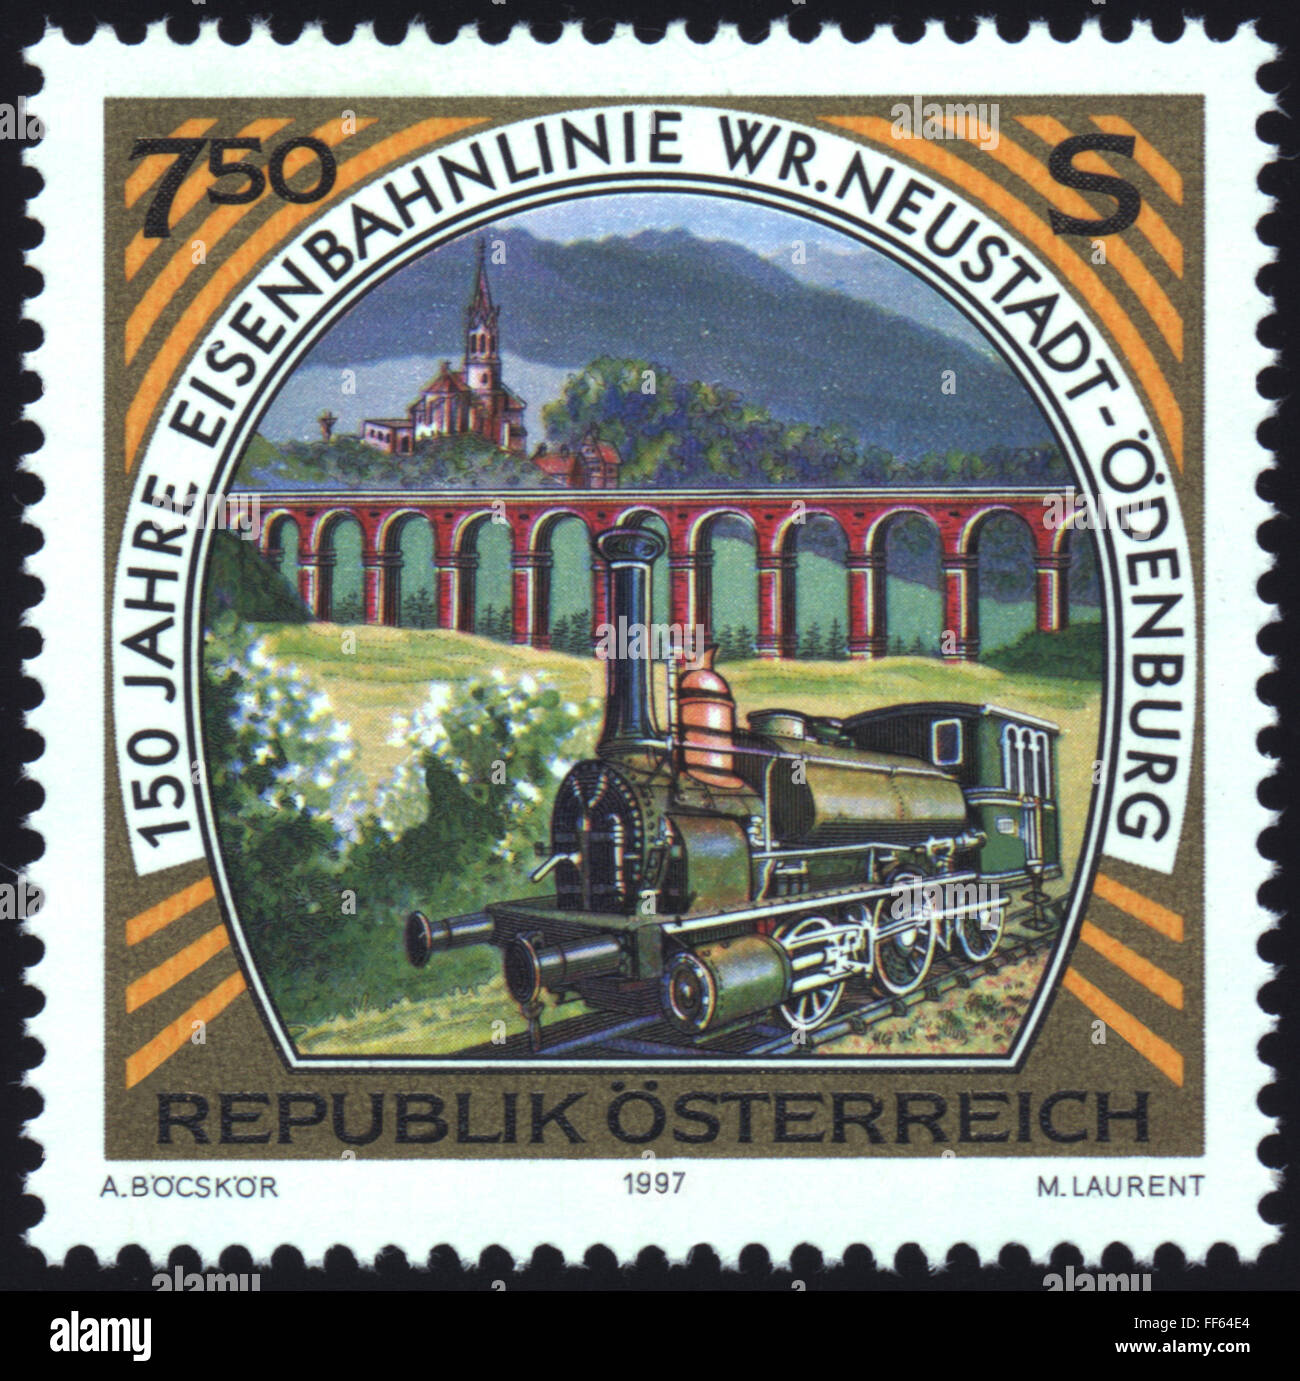 transport / transportation, railway, steam engine, postage stamp of the Republic of Austria commemorating the 150th anniversary of the opening of the railway line from Wiener Neustadt to Sopron, design: A.Böcskör, M.Laurent, 1997, Additional-Rights-Clearences-Not Available Stock Photo